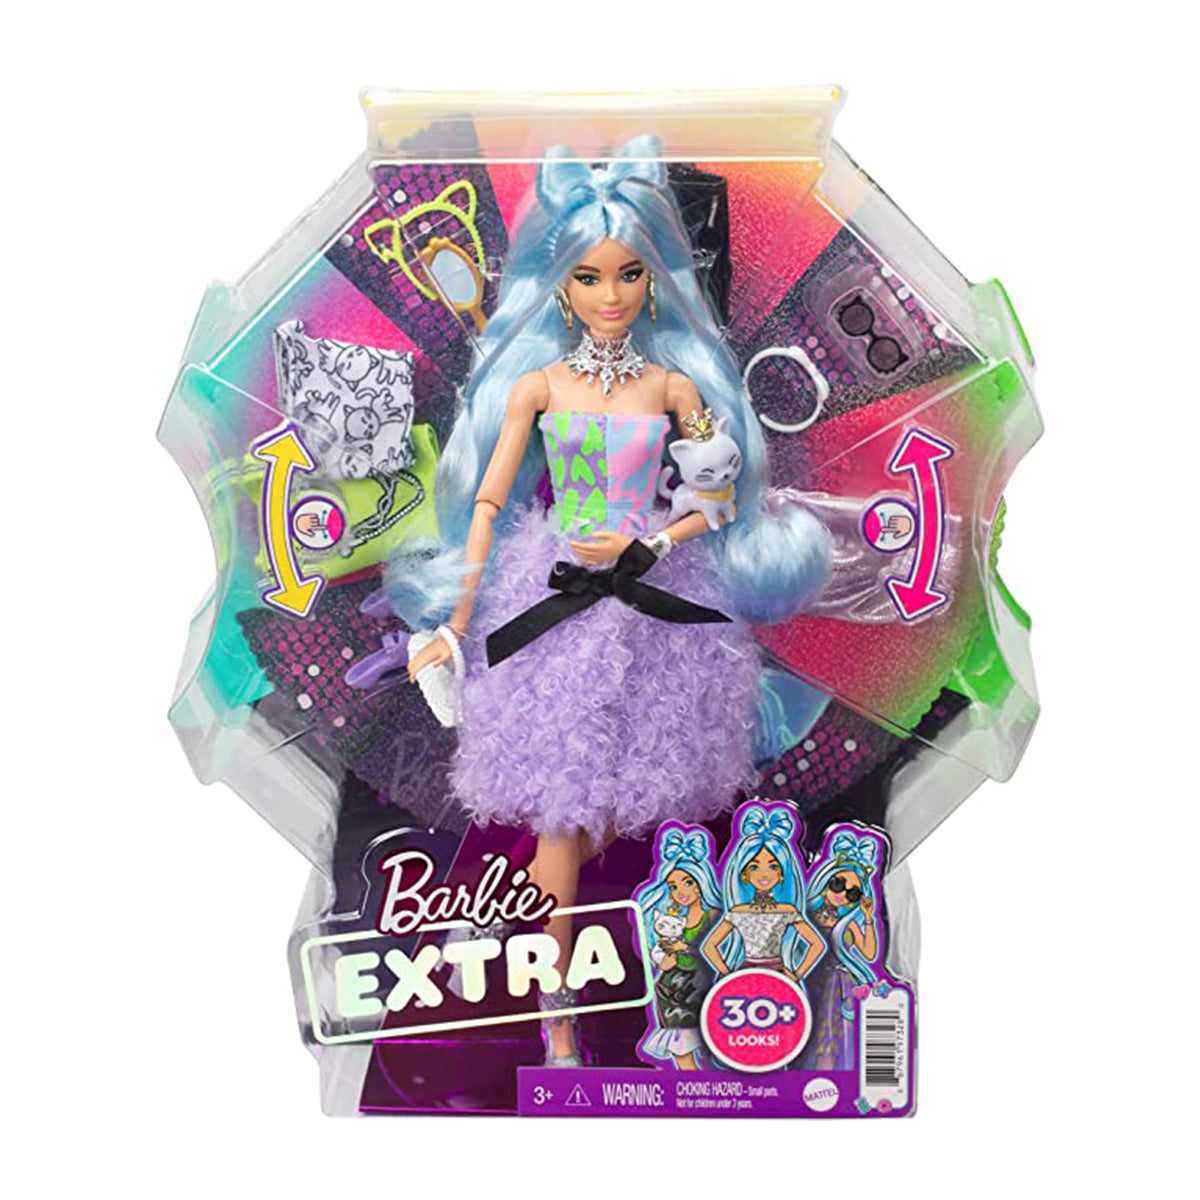 Barbie -Extra Doll & Accessories Playset GYJ69